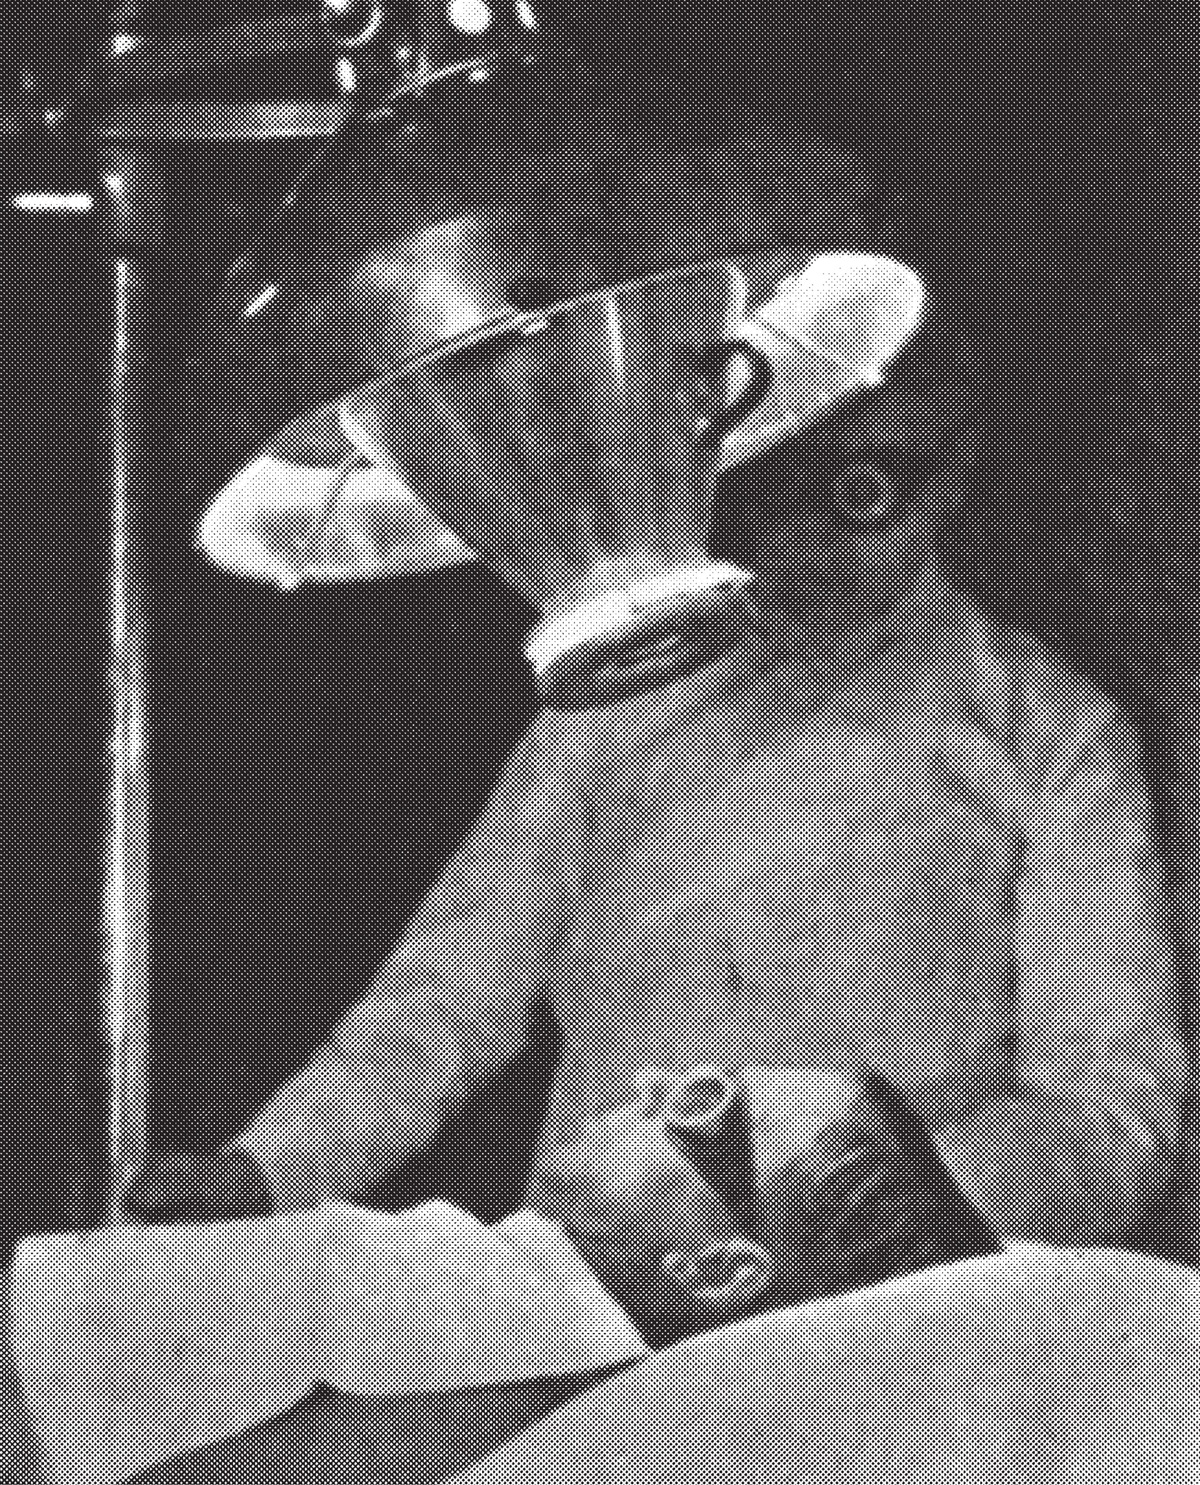 Chromo-Therapy in action using a “Kromayer” light. From a 1938 manual.